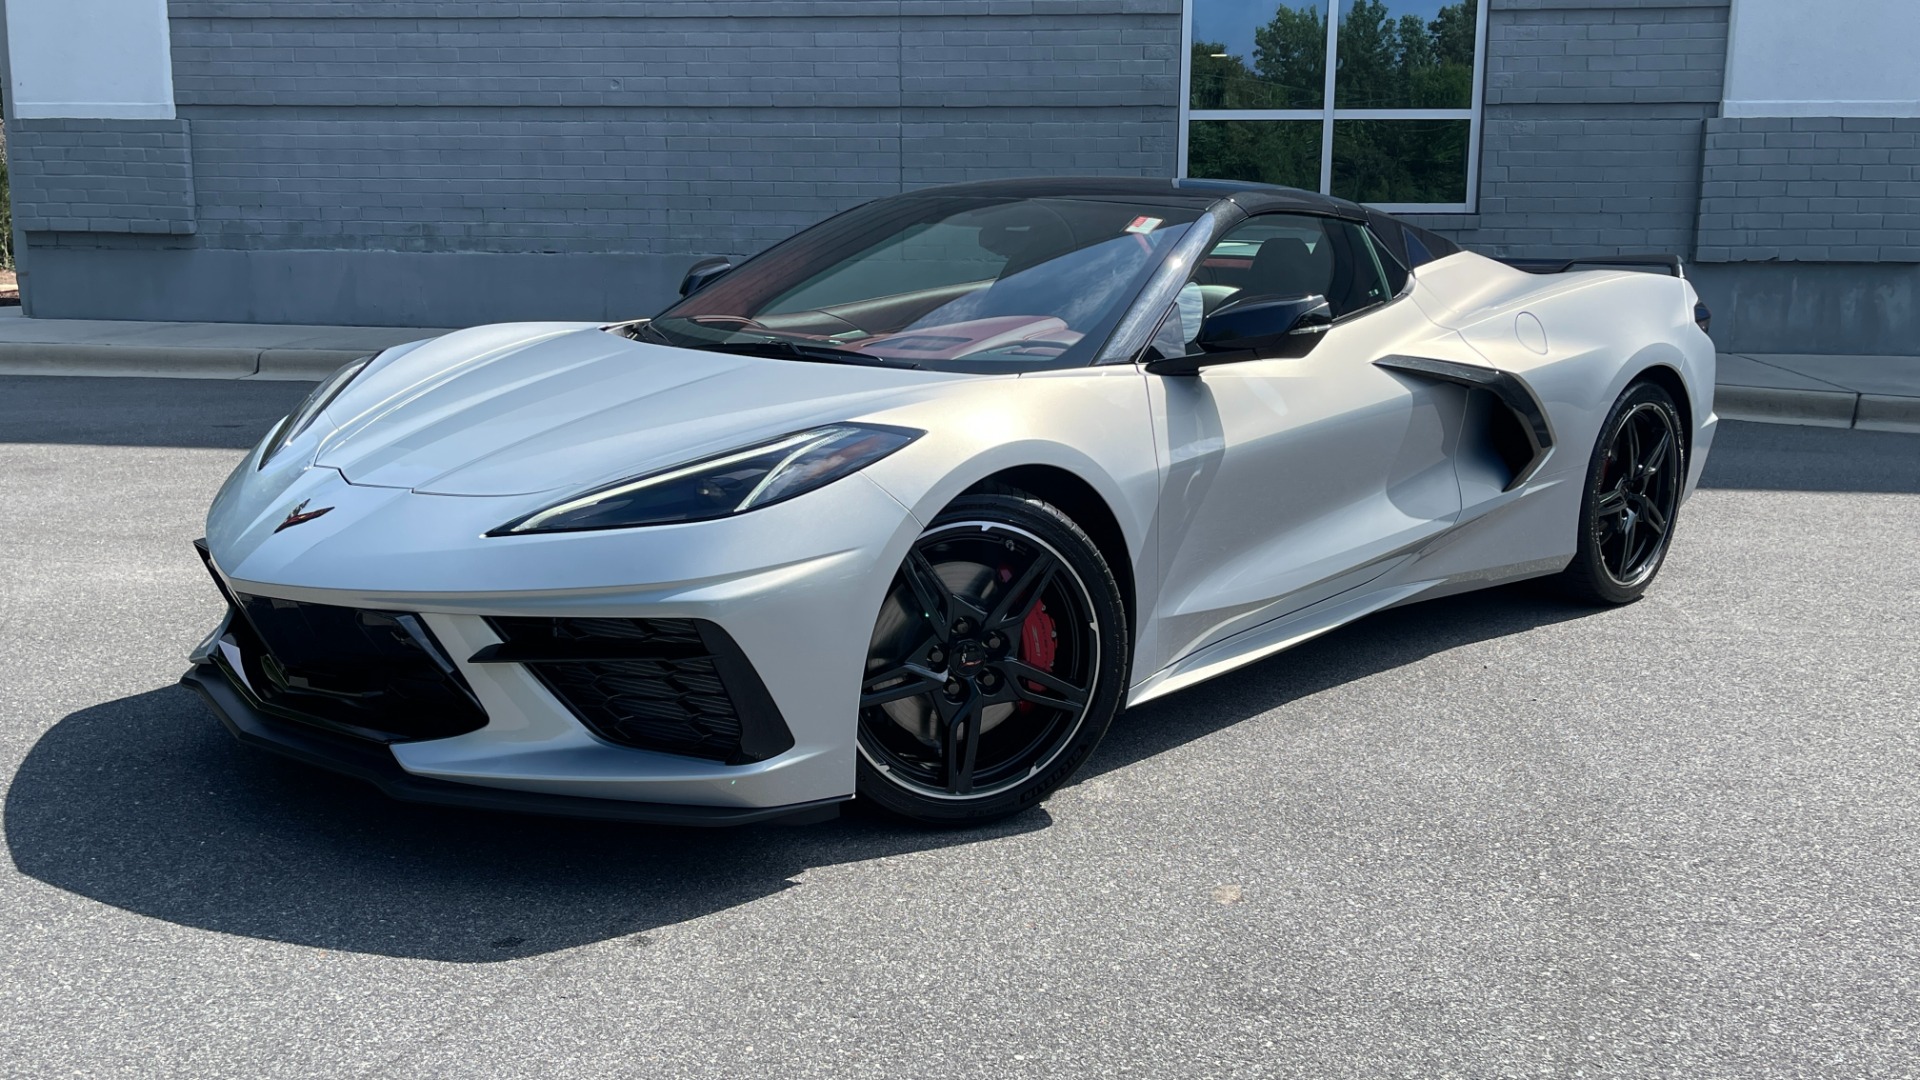 Used 2021 Chevrolet Corvette 3LT / MORELLO DIPPED INTERIOR / Z51 PERF PACK / FRONT LIFT for sale $119,000 at Formula Imports in Charlotte NC 28227 12